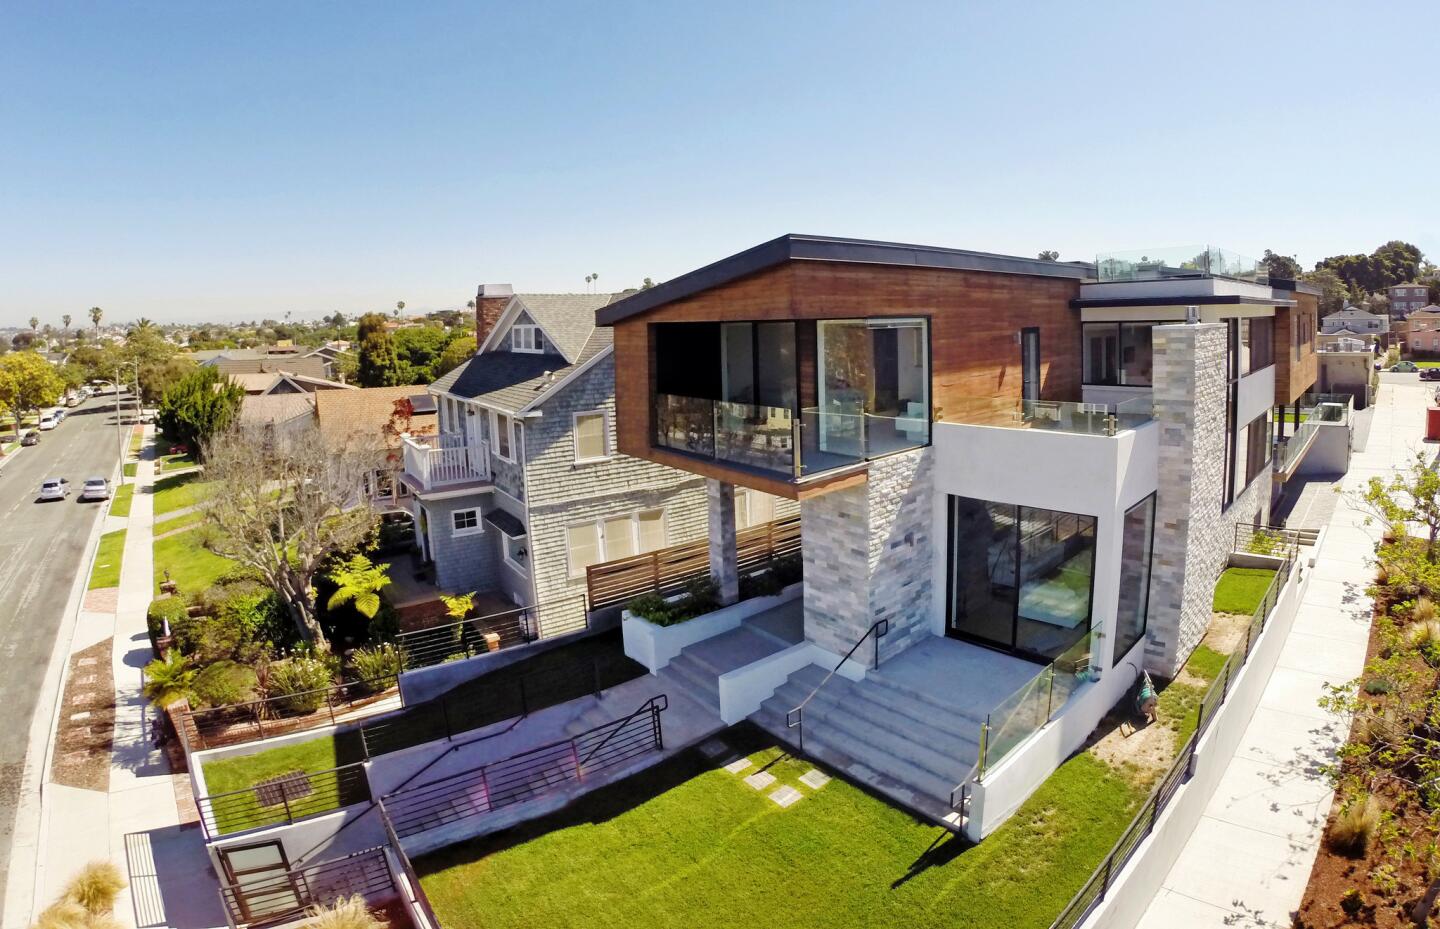 The contemporary home at 628 Elvira Ave., Redondo Beach, is listed at $5 million.